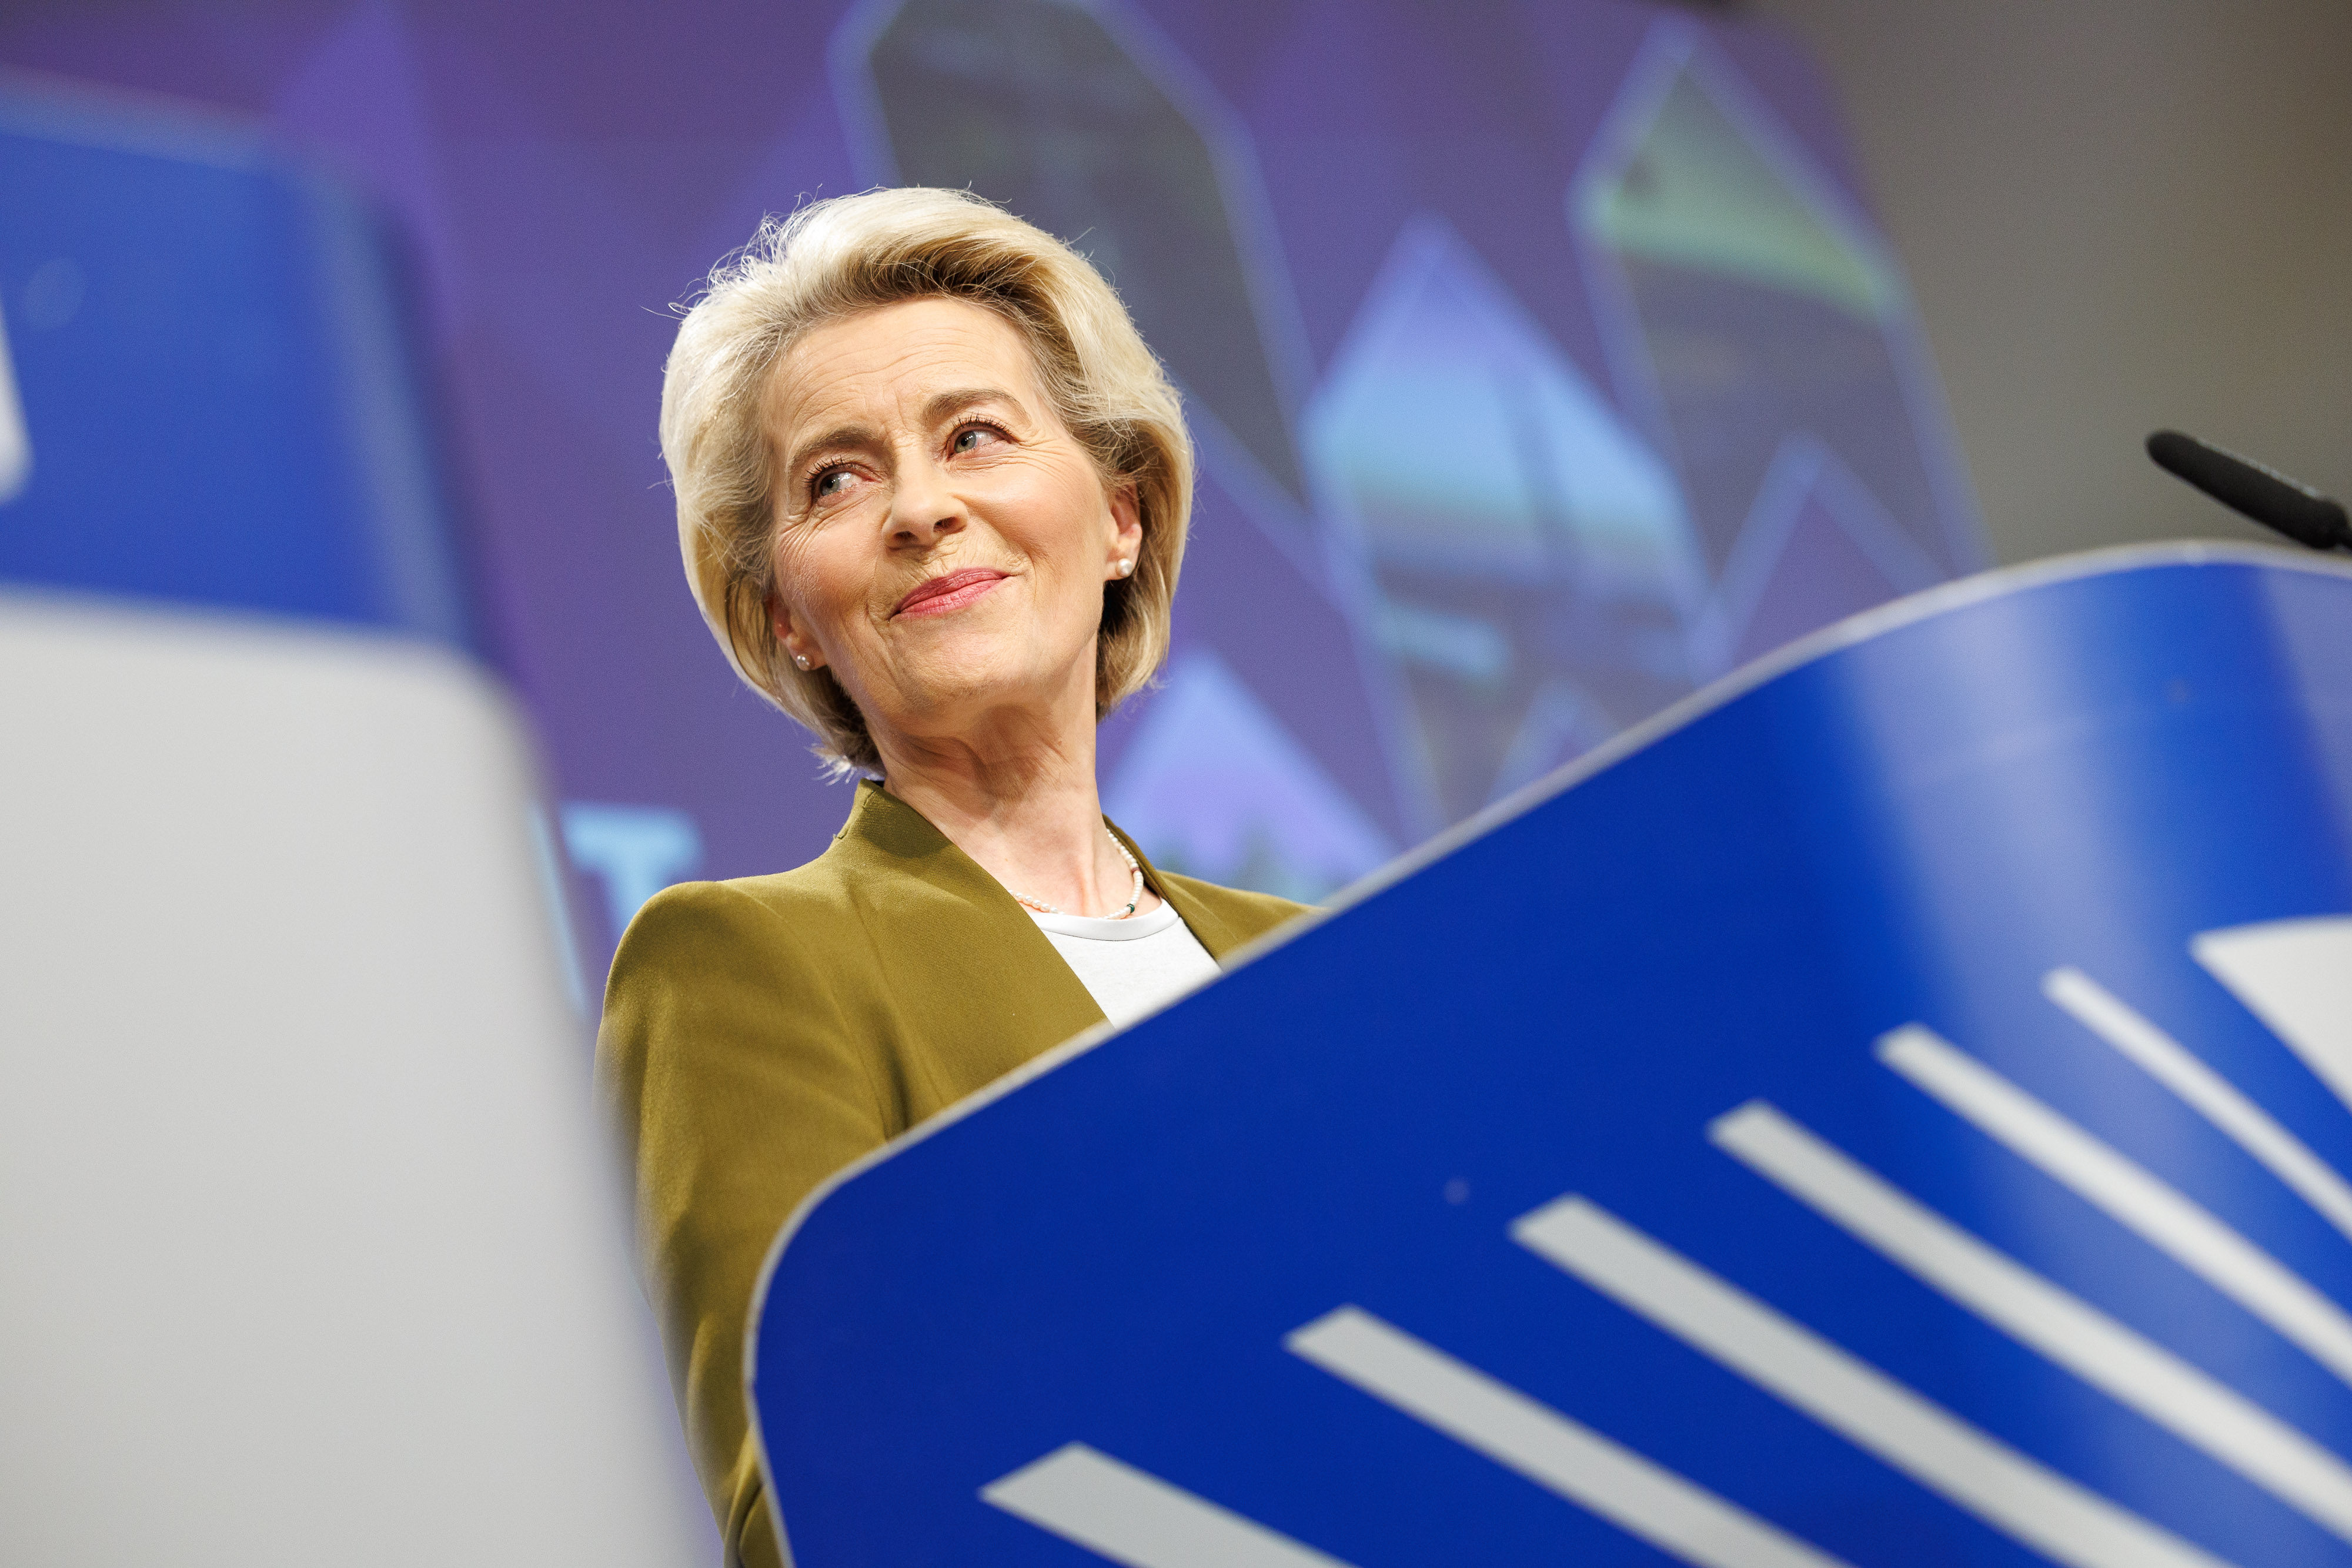 Leaders of China and the EU, including European Commission chief Ursula von der Leyen, will meet in Beijing on Thursday for their first in-person summit since 2019. Photo: European Commission/dpa